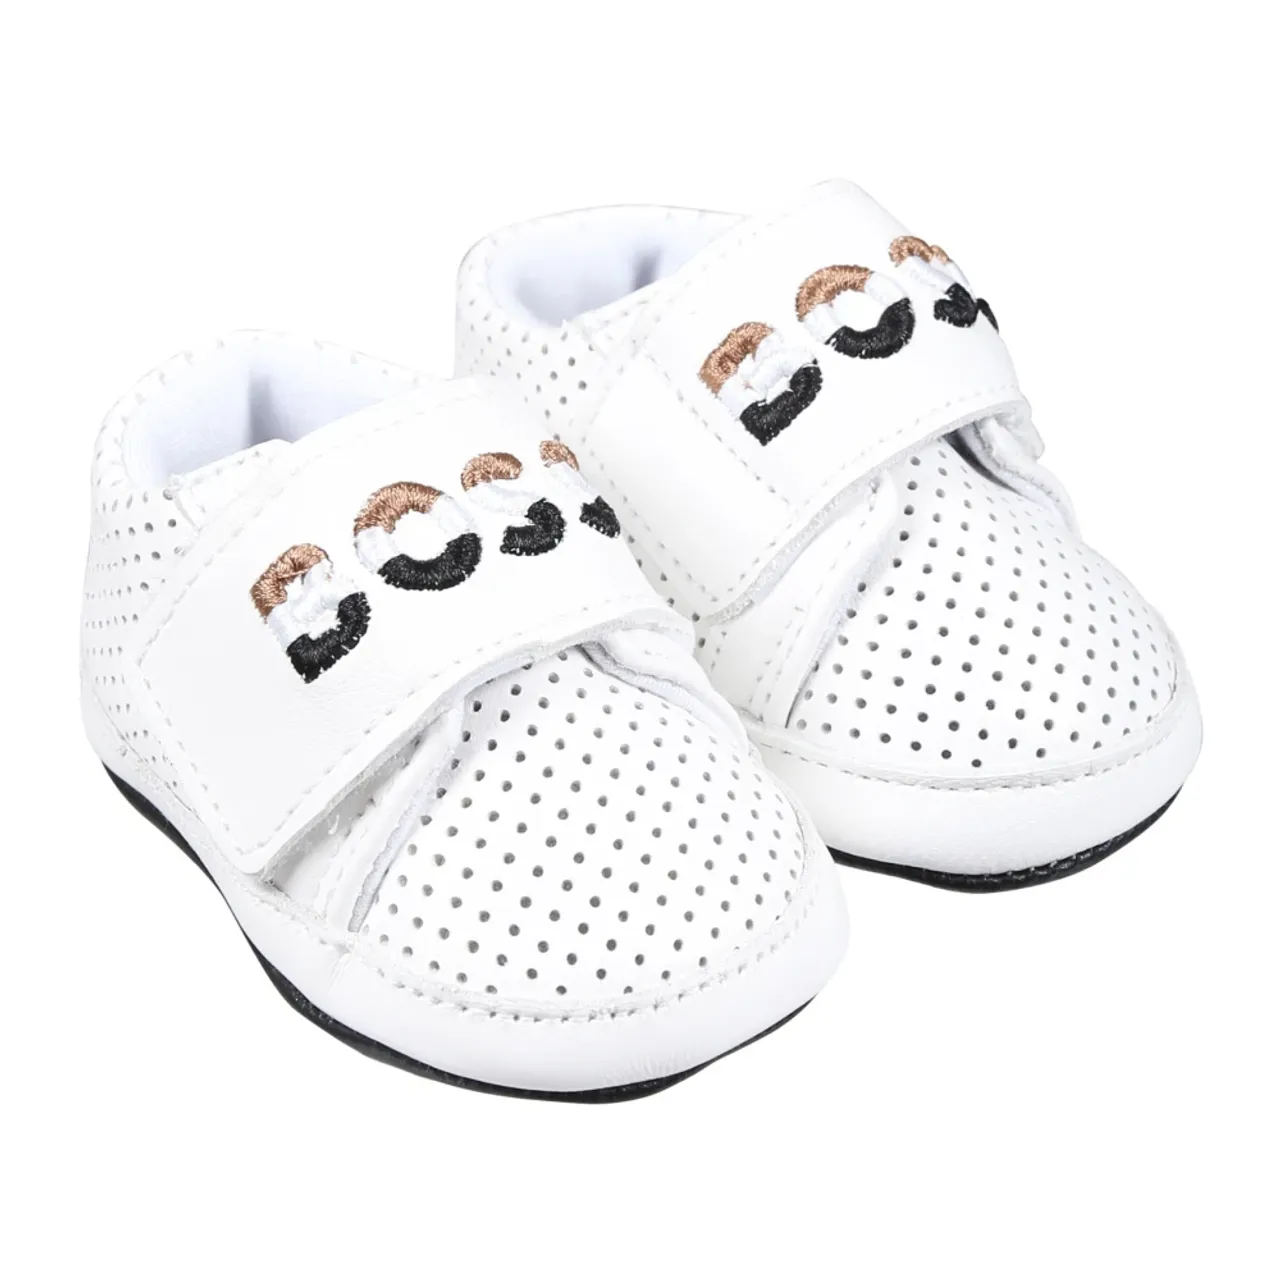 Hugo Boss , White Leather Sneakers with Velcro Closure ,White unisex, Sizes: